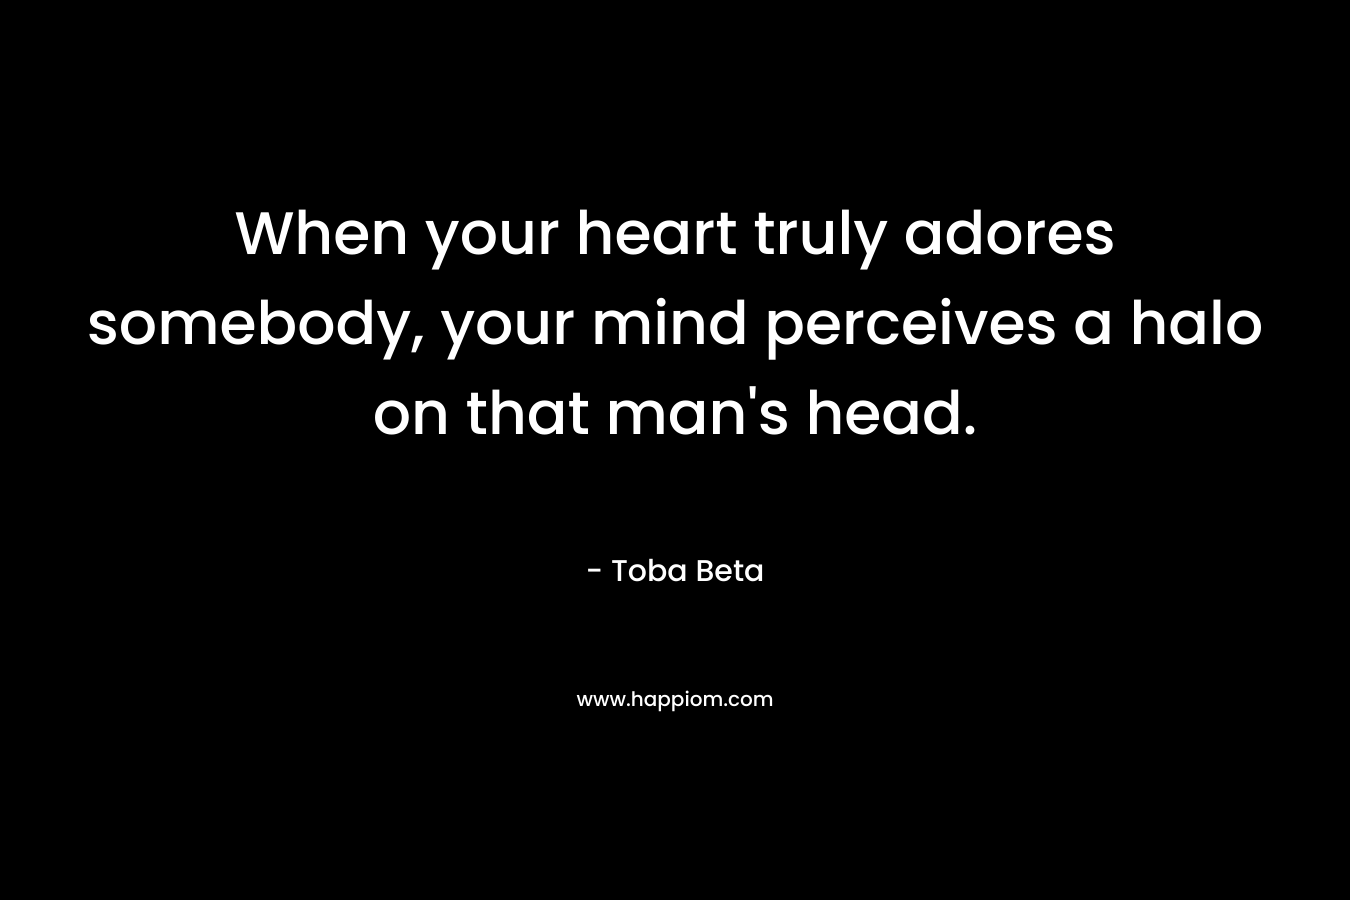 When your heart truly adores somebody, your mind perceives a halo on that man’s head. – Toba Beta